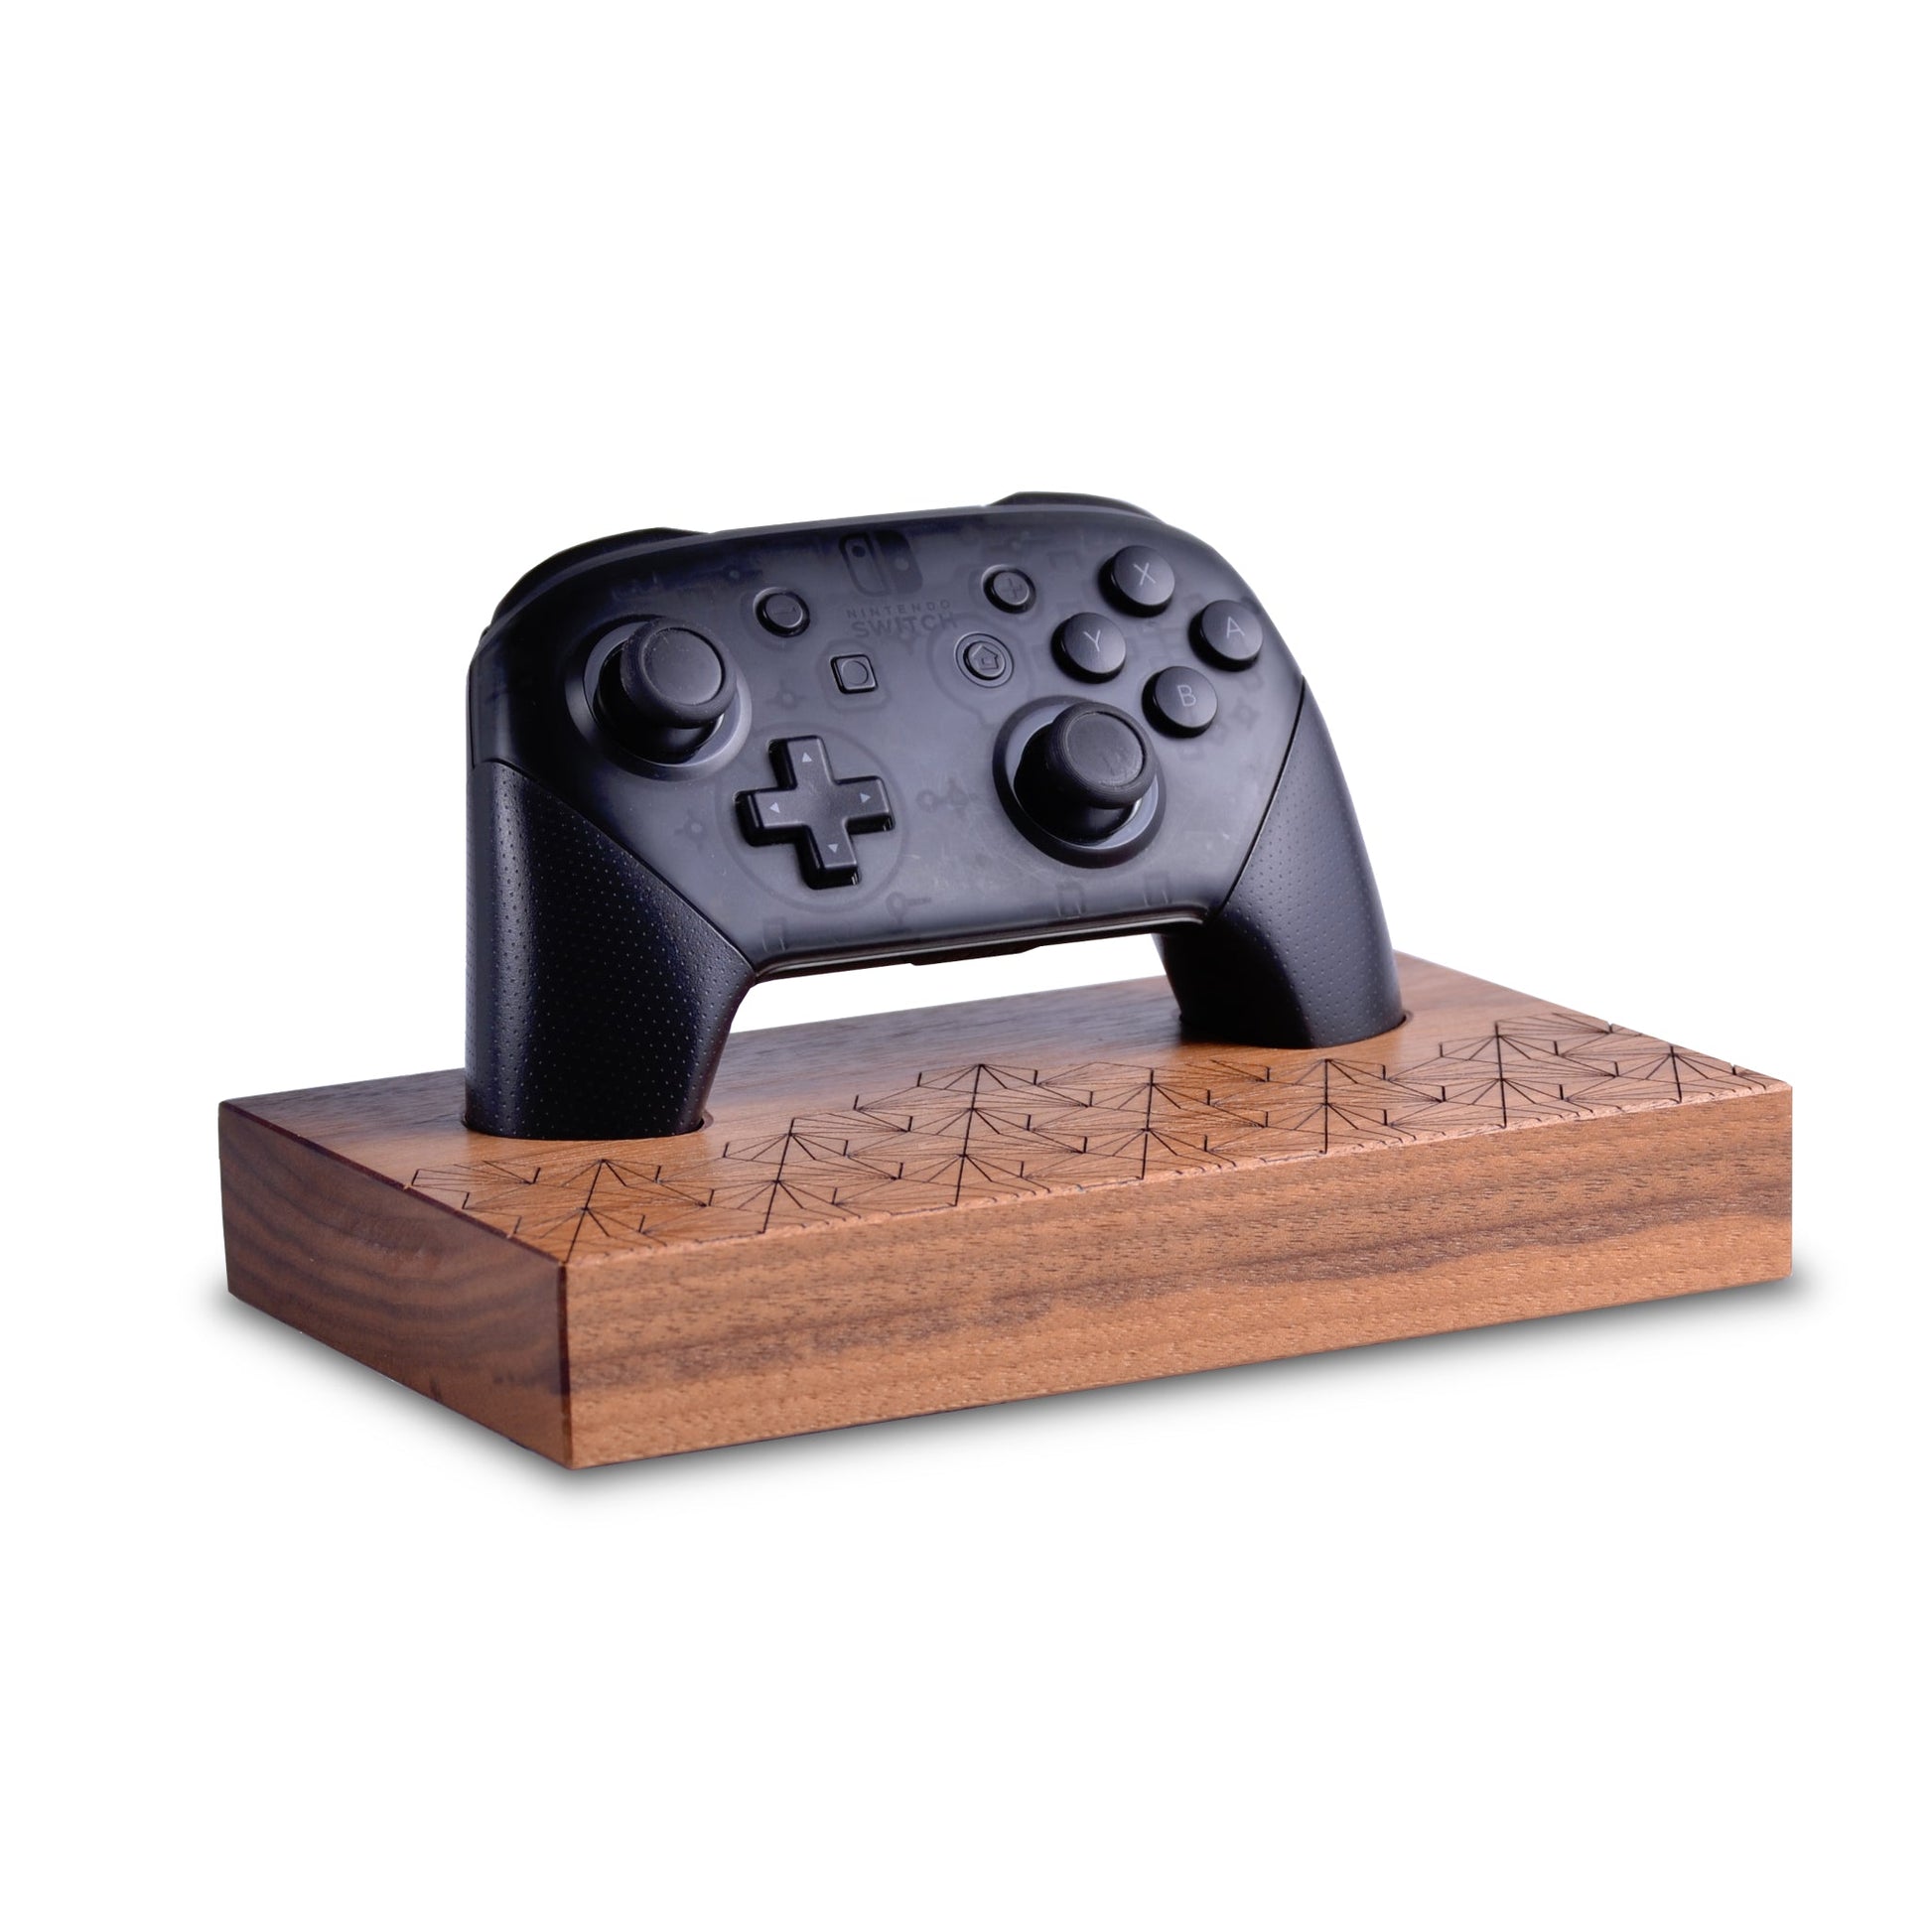 Wooden stand with geometric pattern for Nintendo switch pro controller